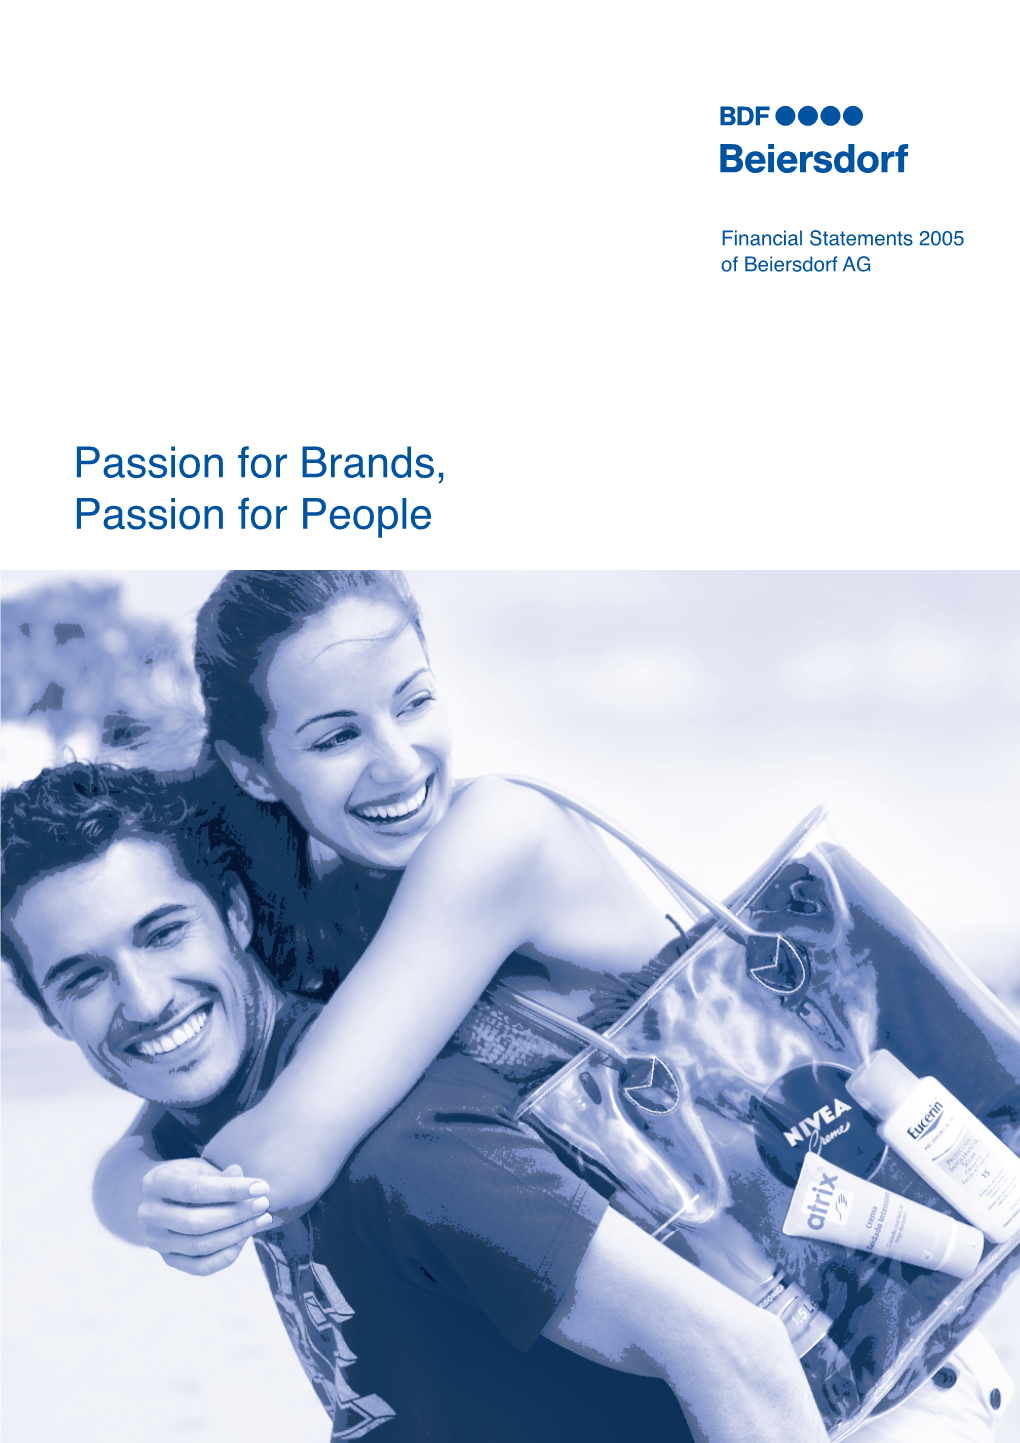 Passion for Brands, Passion for People Annual Financial Statements Notes